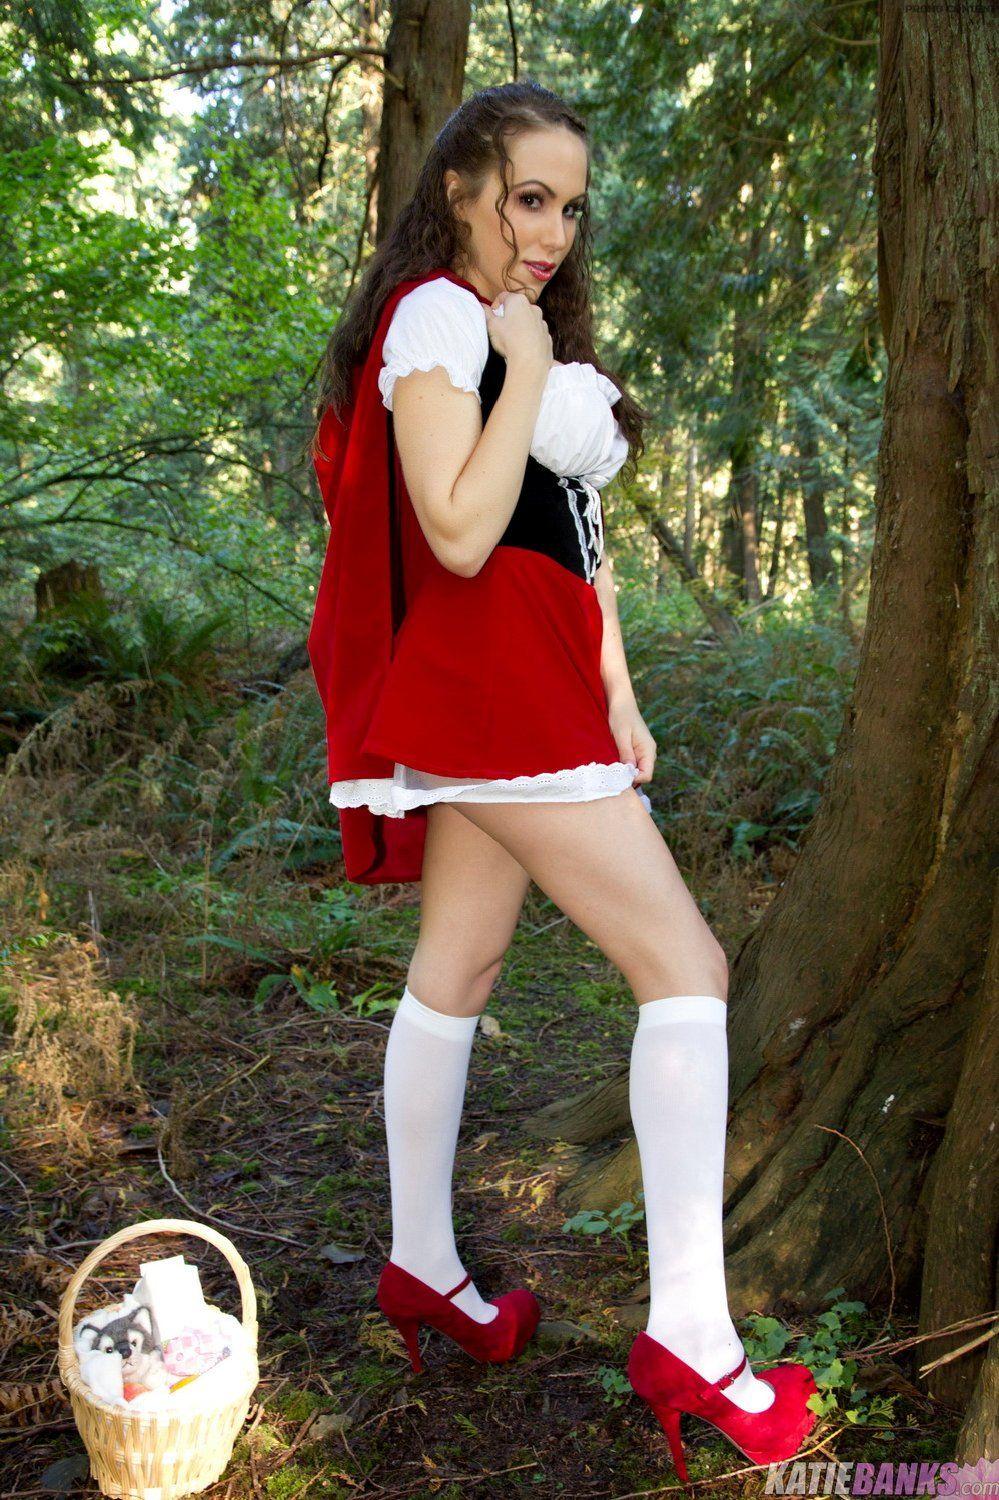 Pictures of Katie Banks dressed as Little Red Riding Hood #58101028